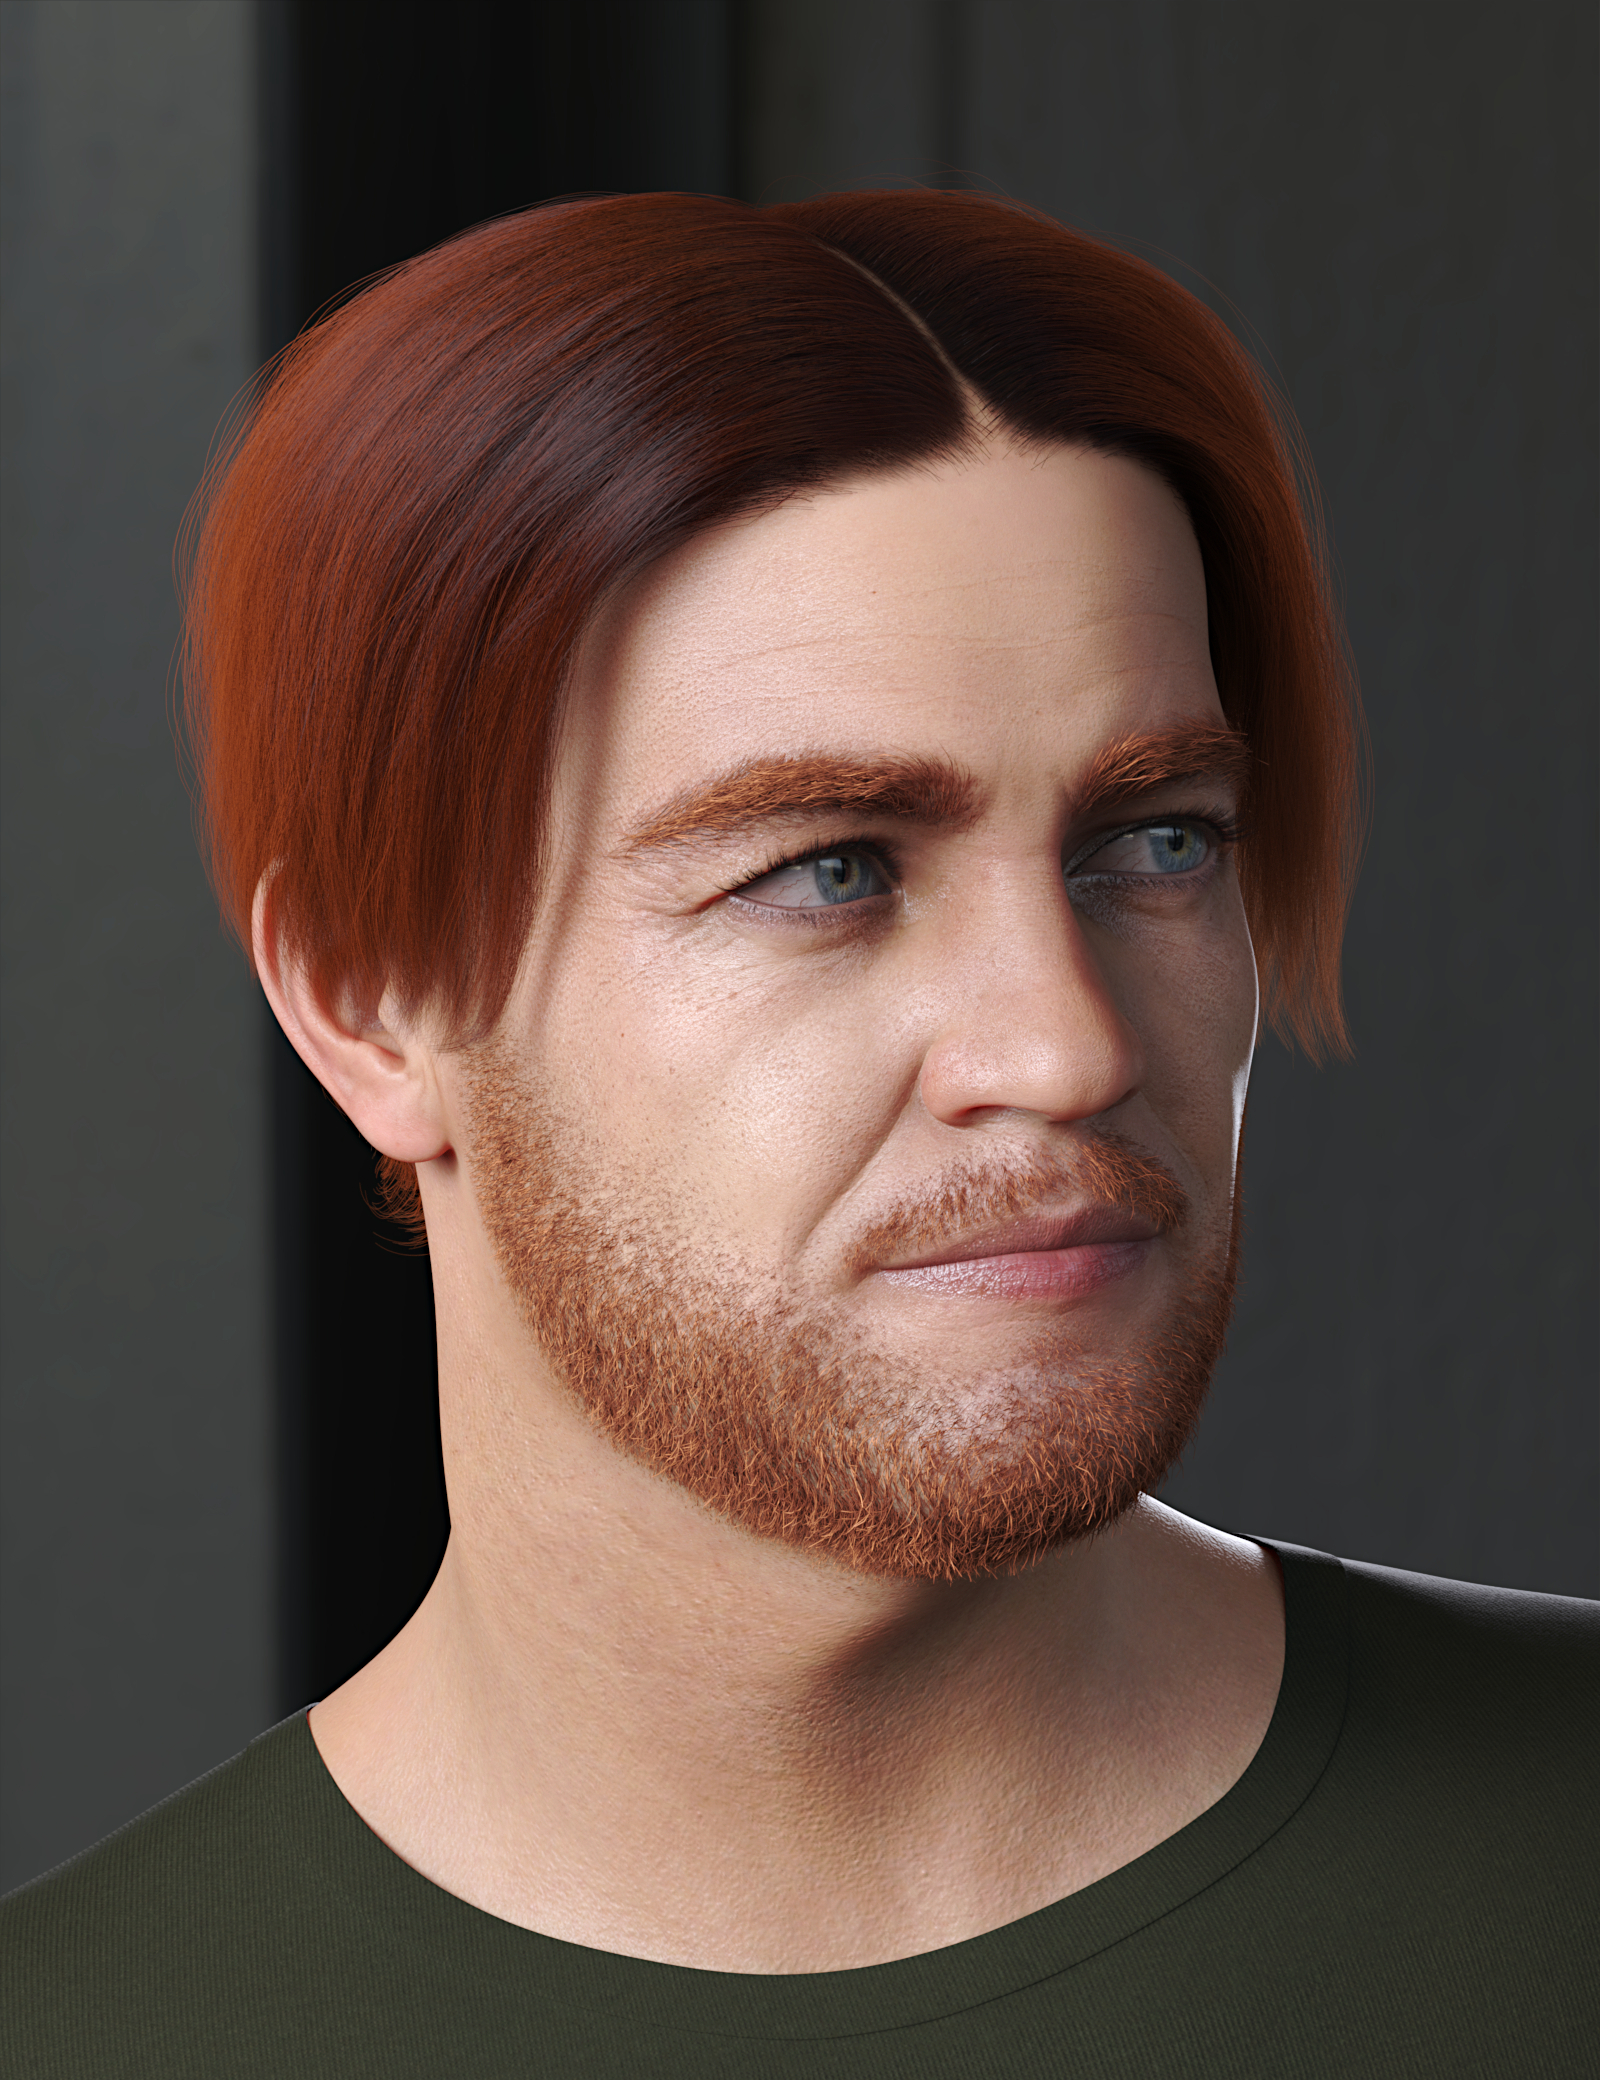 90s Boyband Hair for Genesis 8 and 8.1 Males by: Toyen, 3D Models by Daz 3D